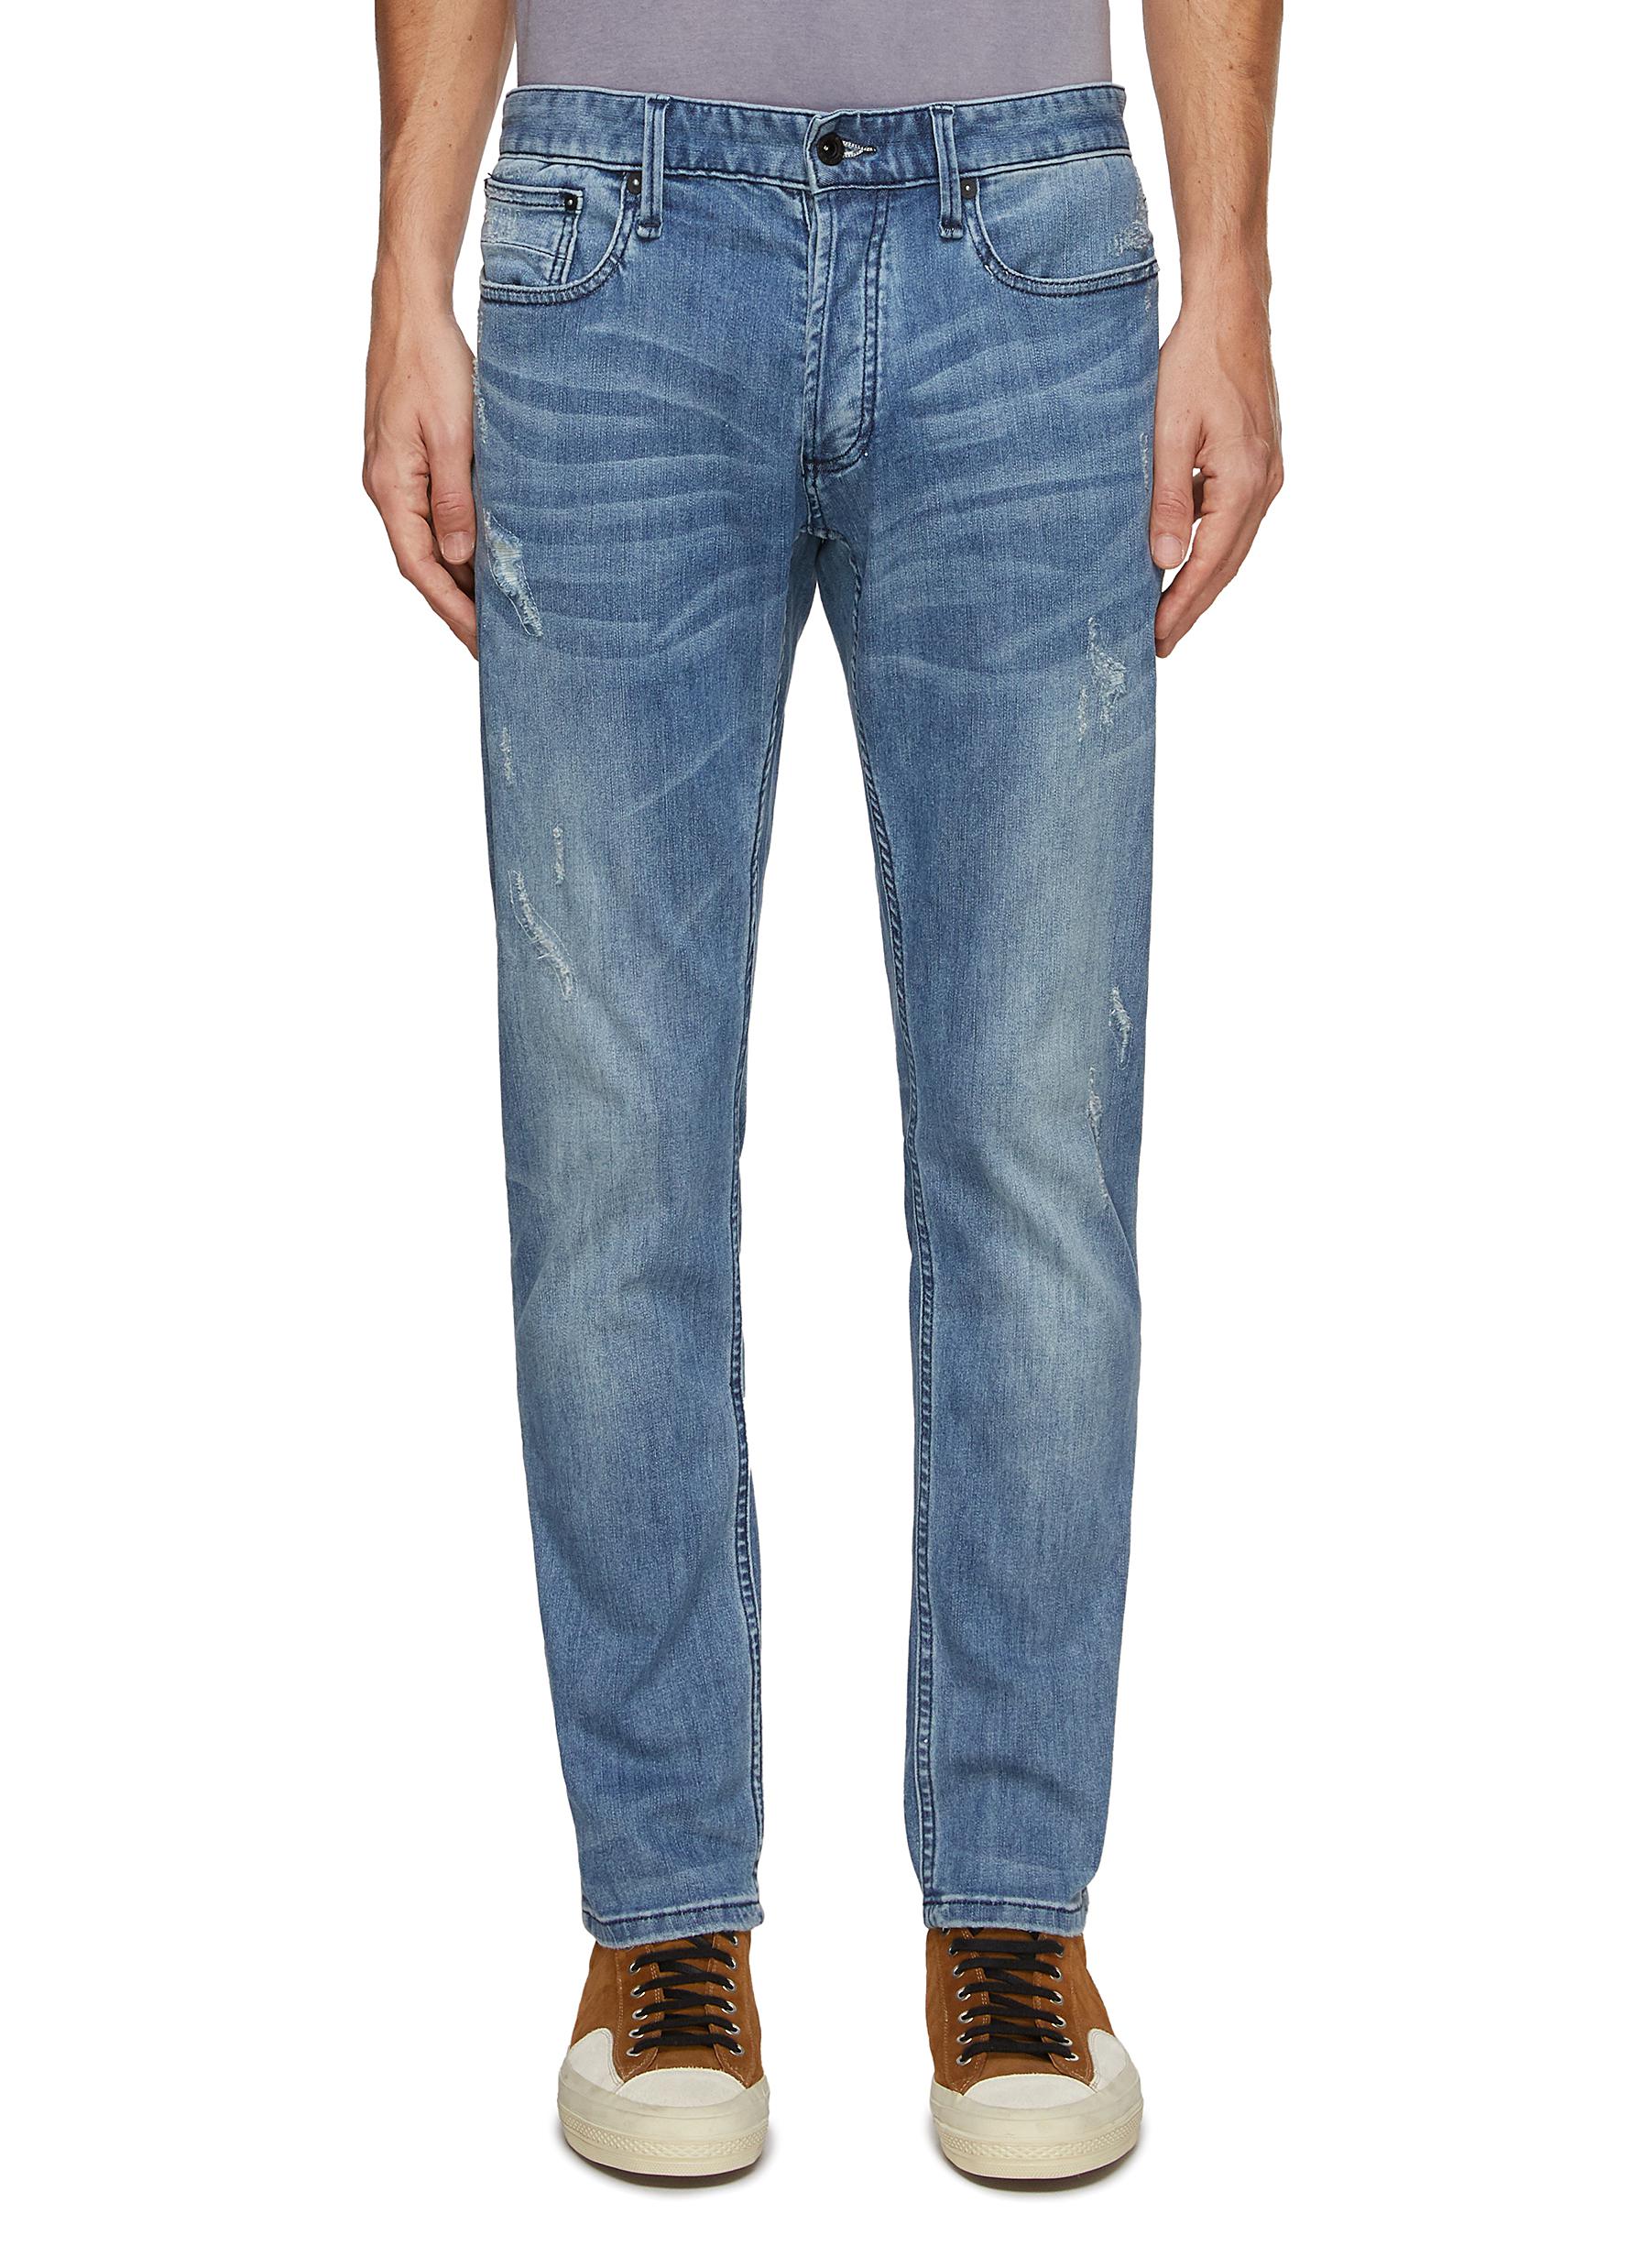 FREE MOVE WHISKERED STRAIGHT LEG JEANS